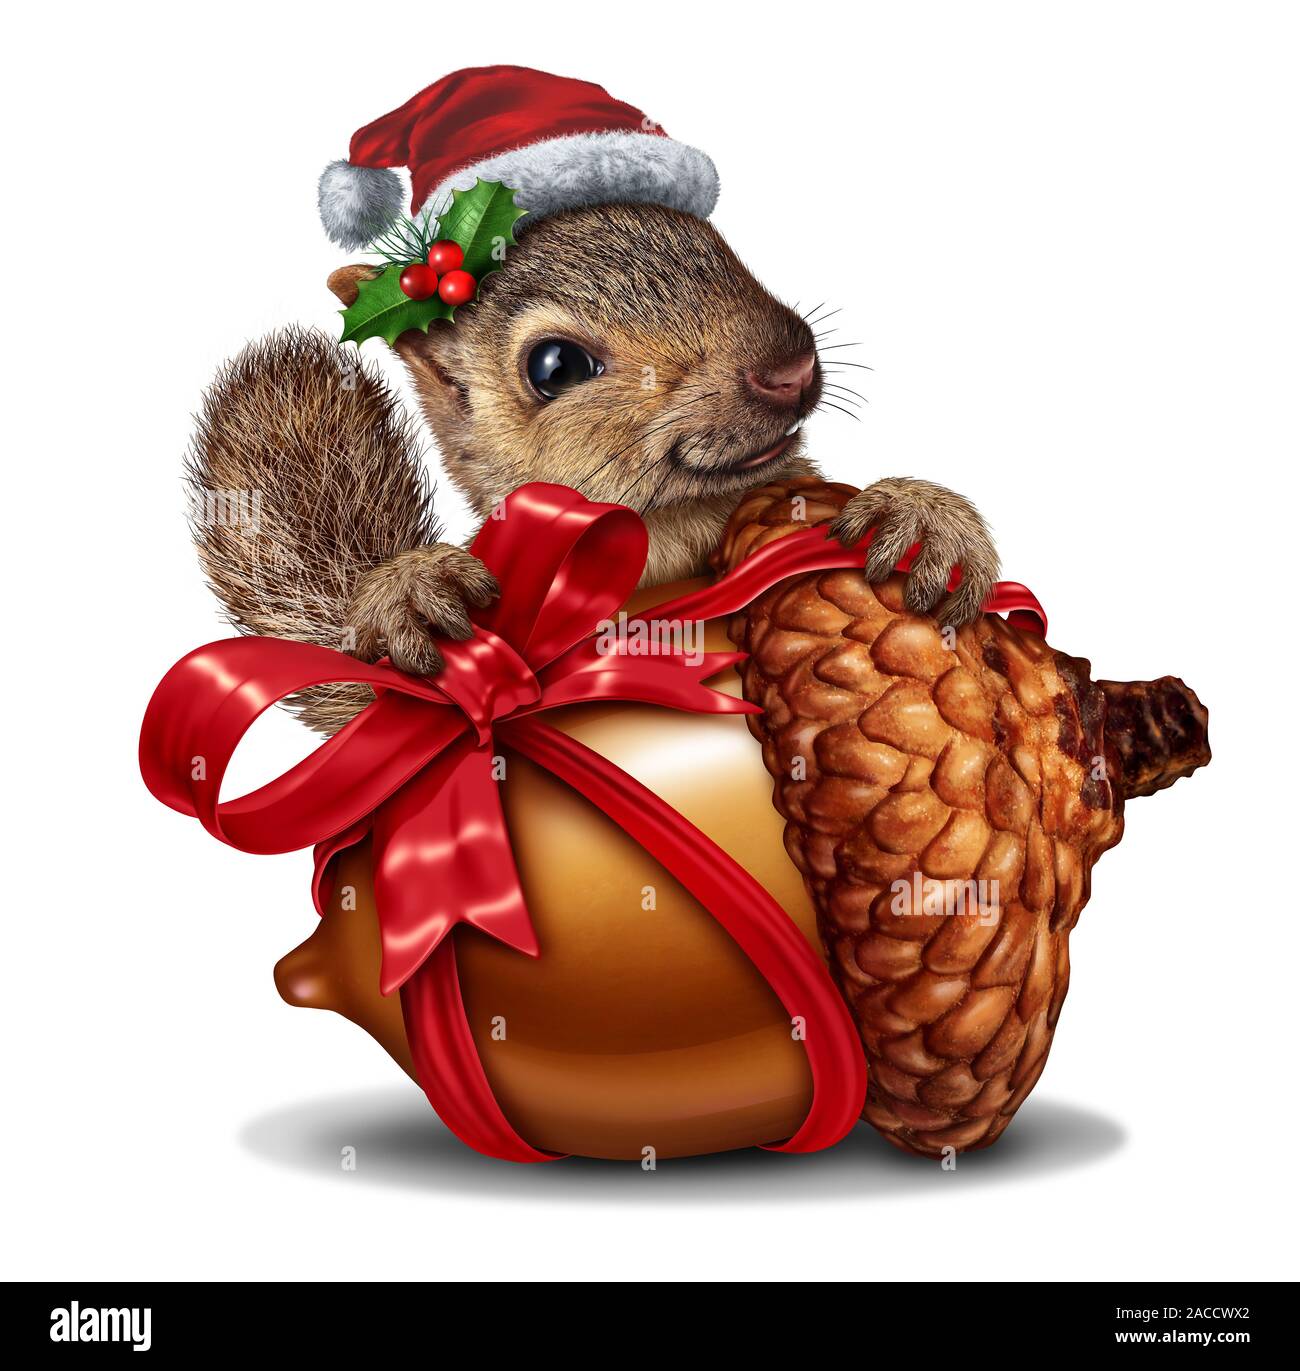 Christmas squirrel gift as a funny and cute animal holding a giant acorn tree nut with a red festive bow as a holiday symbol representing joy. Stock Photo